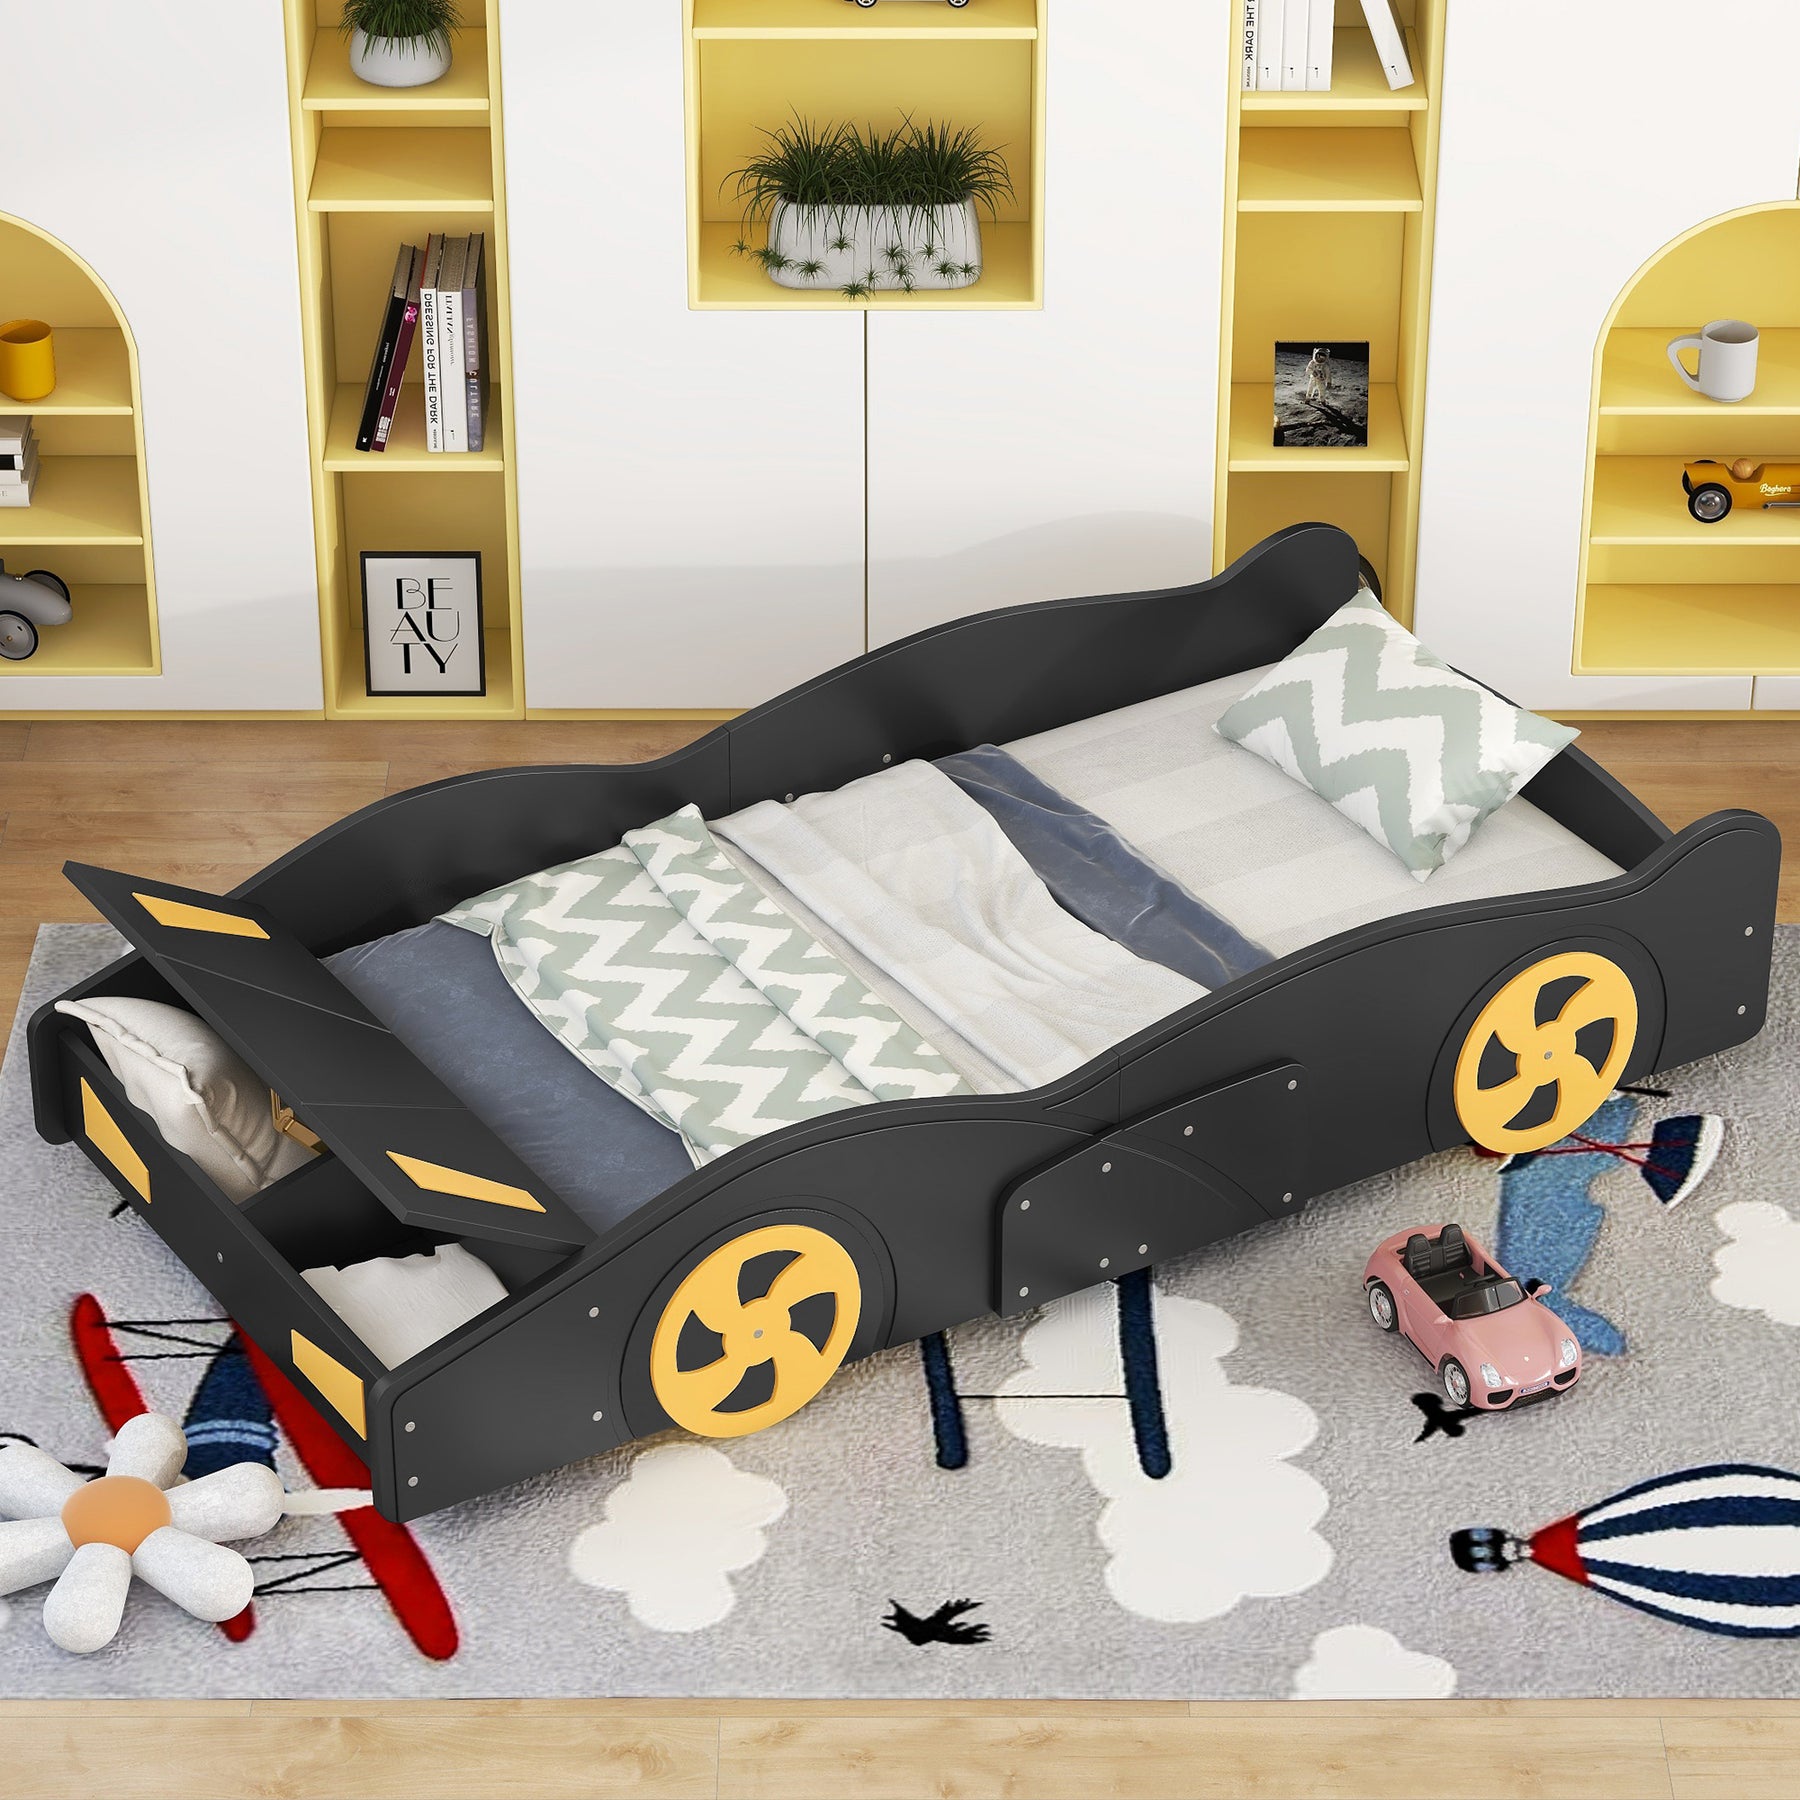 Twin Size Race Car-Shaped Platform Bed with Wheels and Storage, Black+Yellow - Tonkn